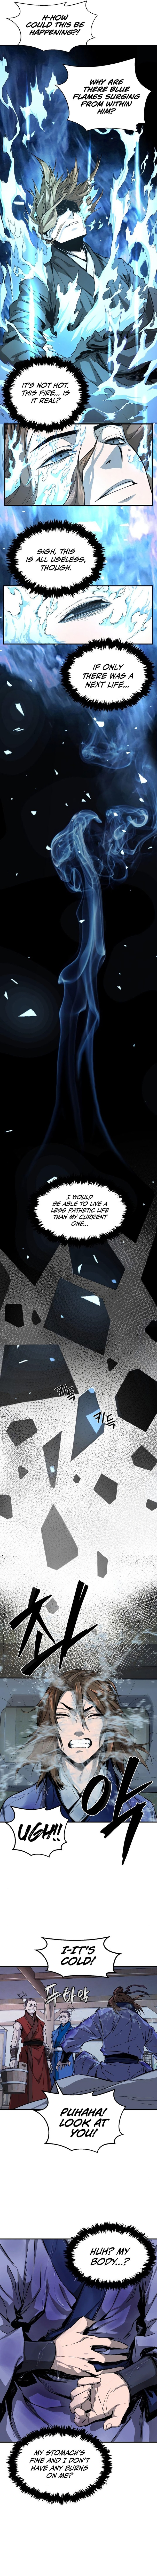 Absolute Sword Sense Chapter 1 Page 8